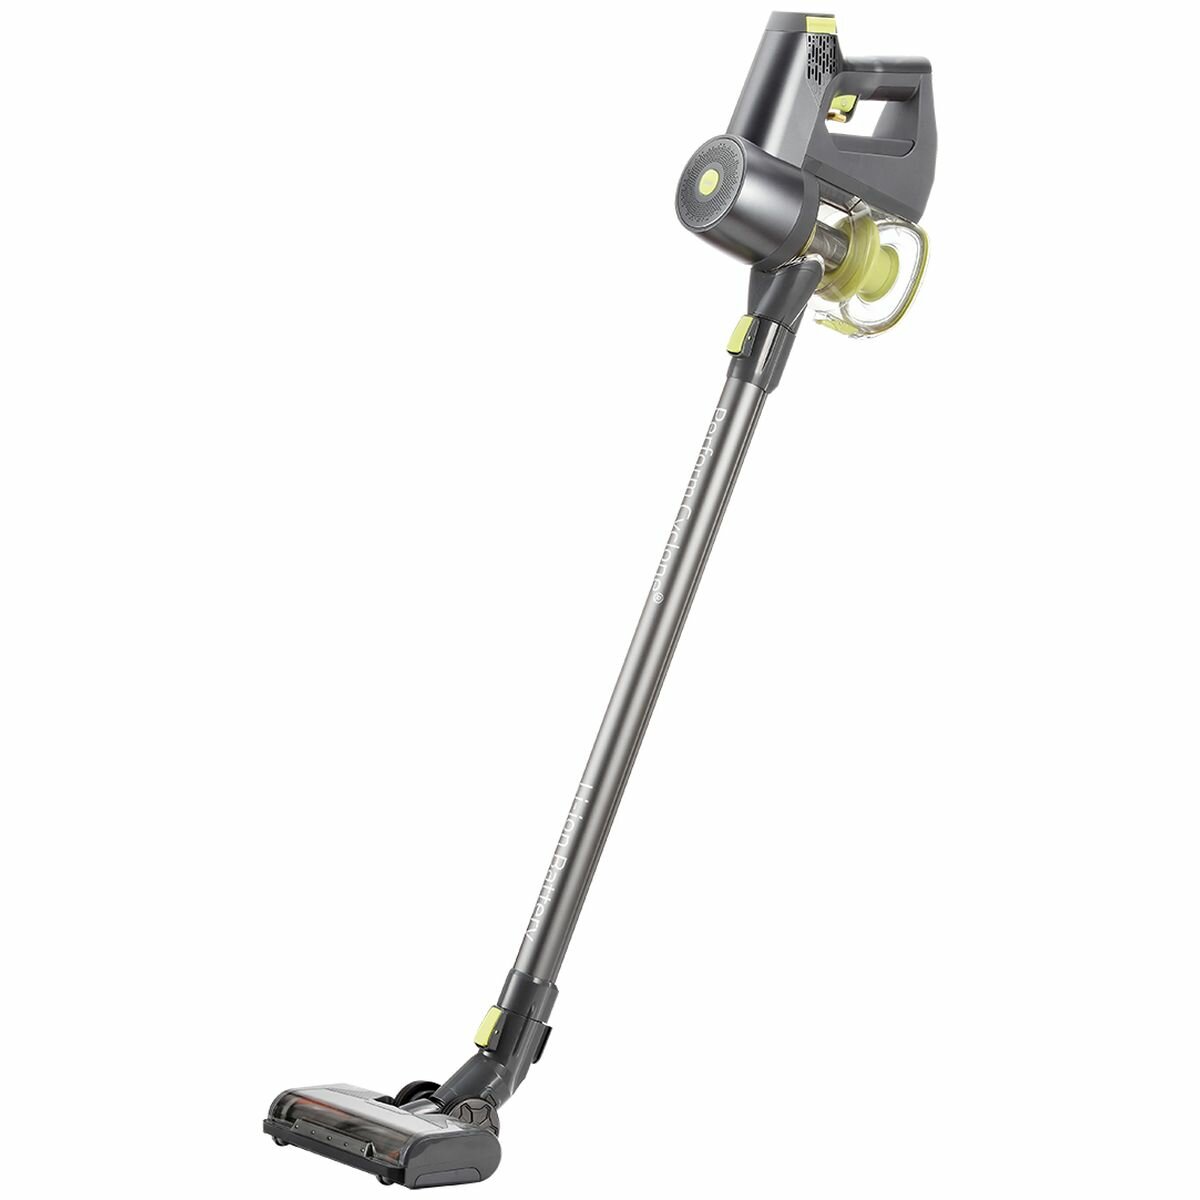 Beko Power Stick Cordless 2 in 1 Rechargeable Stick Vacuum Cleaner